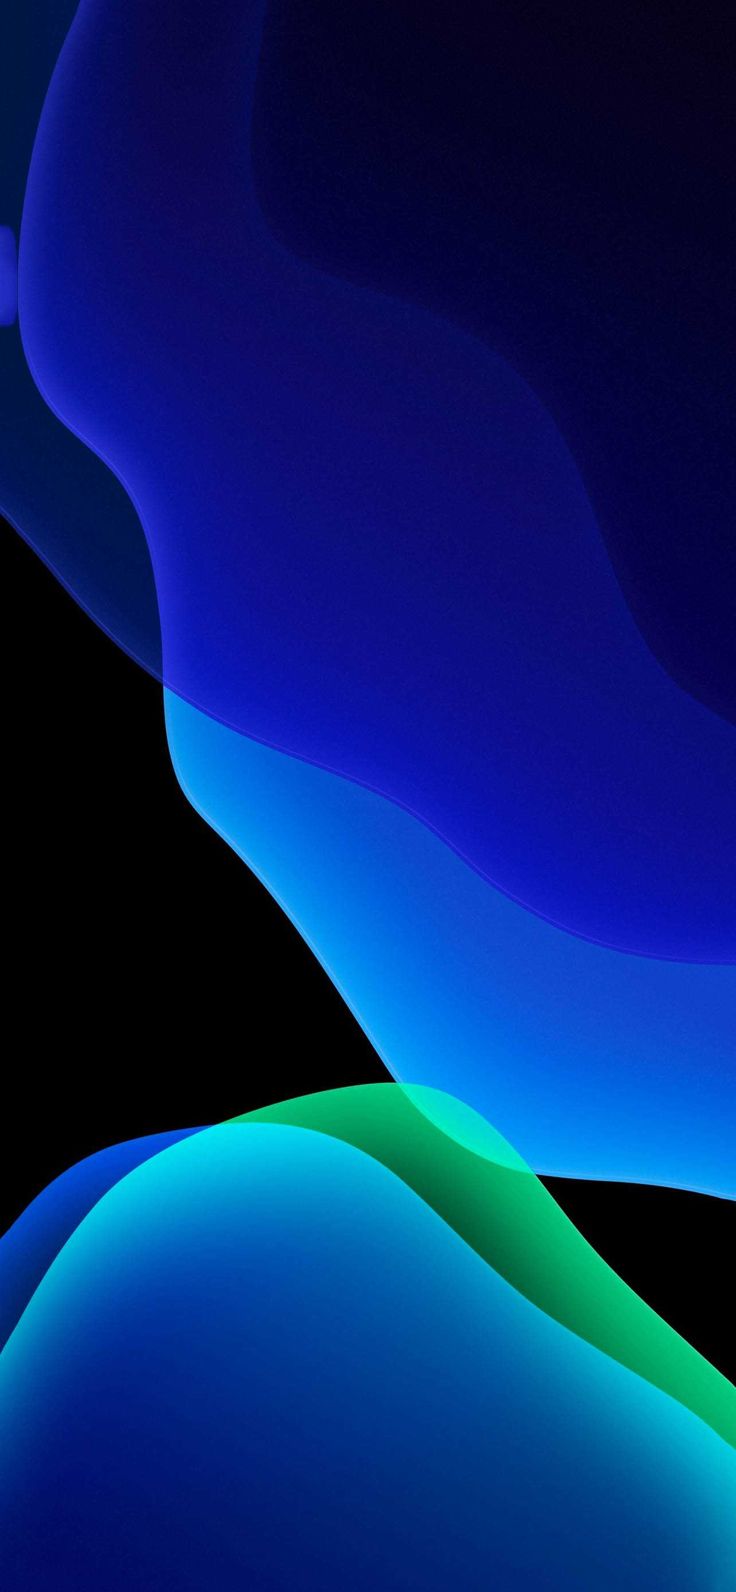 iPhone 13 Pro Max Wallpaper Discover more Aesthetic, Apple, IOS, iOS iPhone wallpaper.. Samsung wallpaper, iPhone wallpaper ios, Apple wallpaper iphone